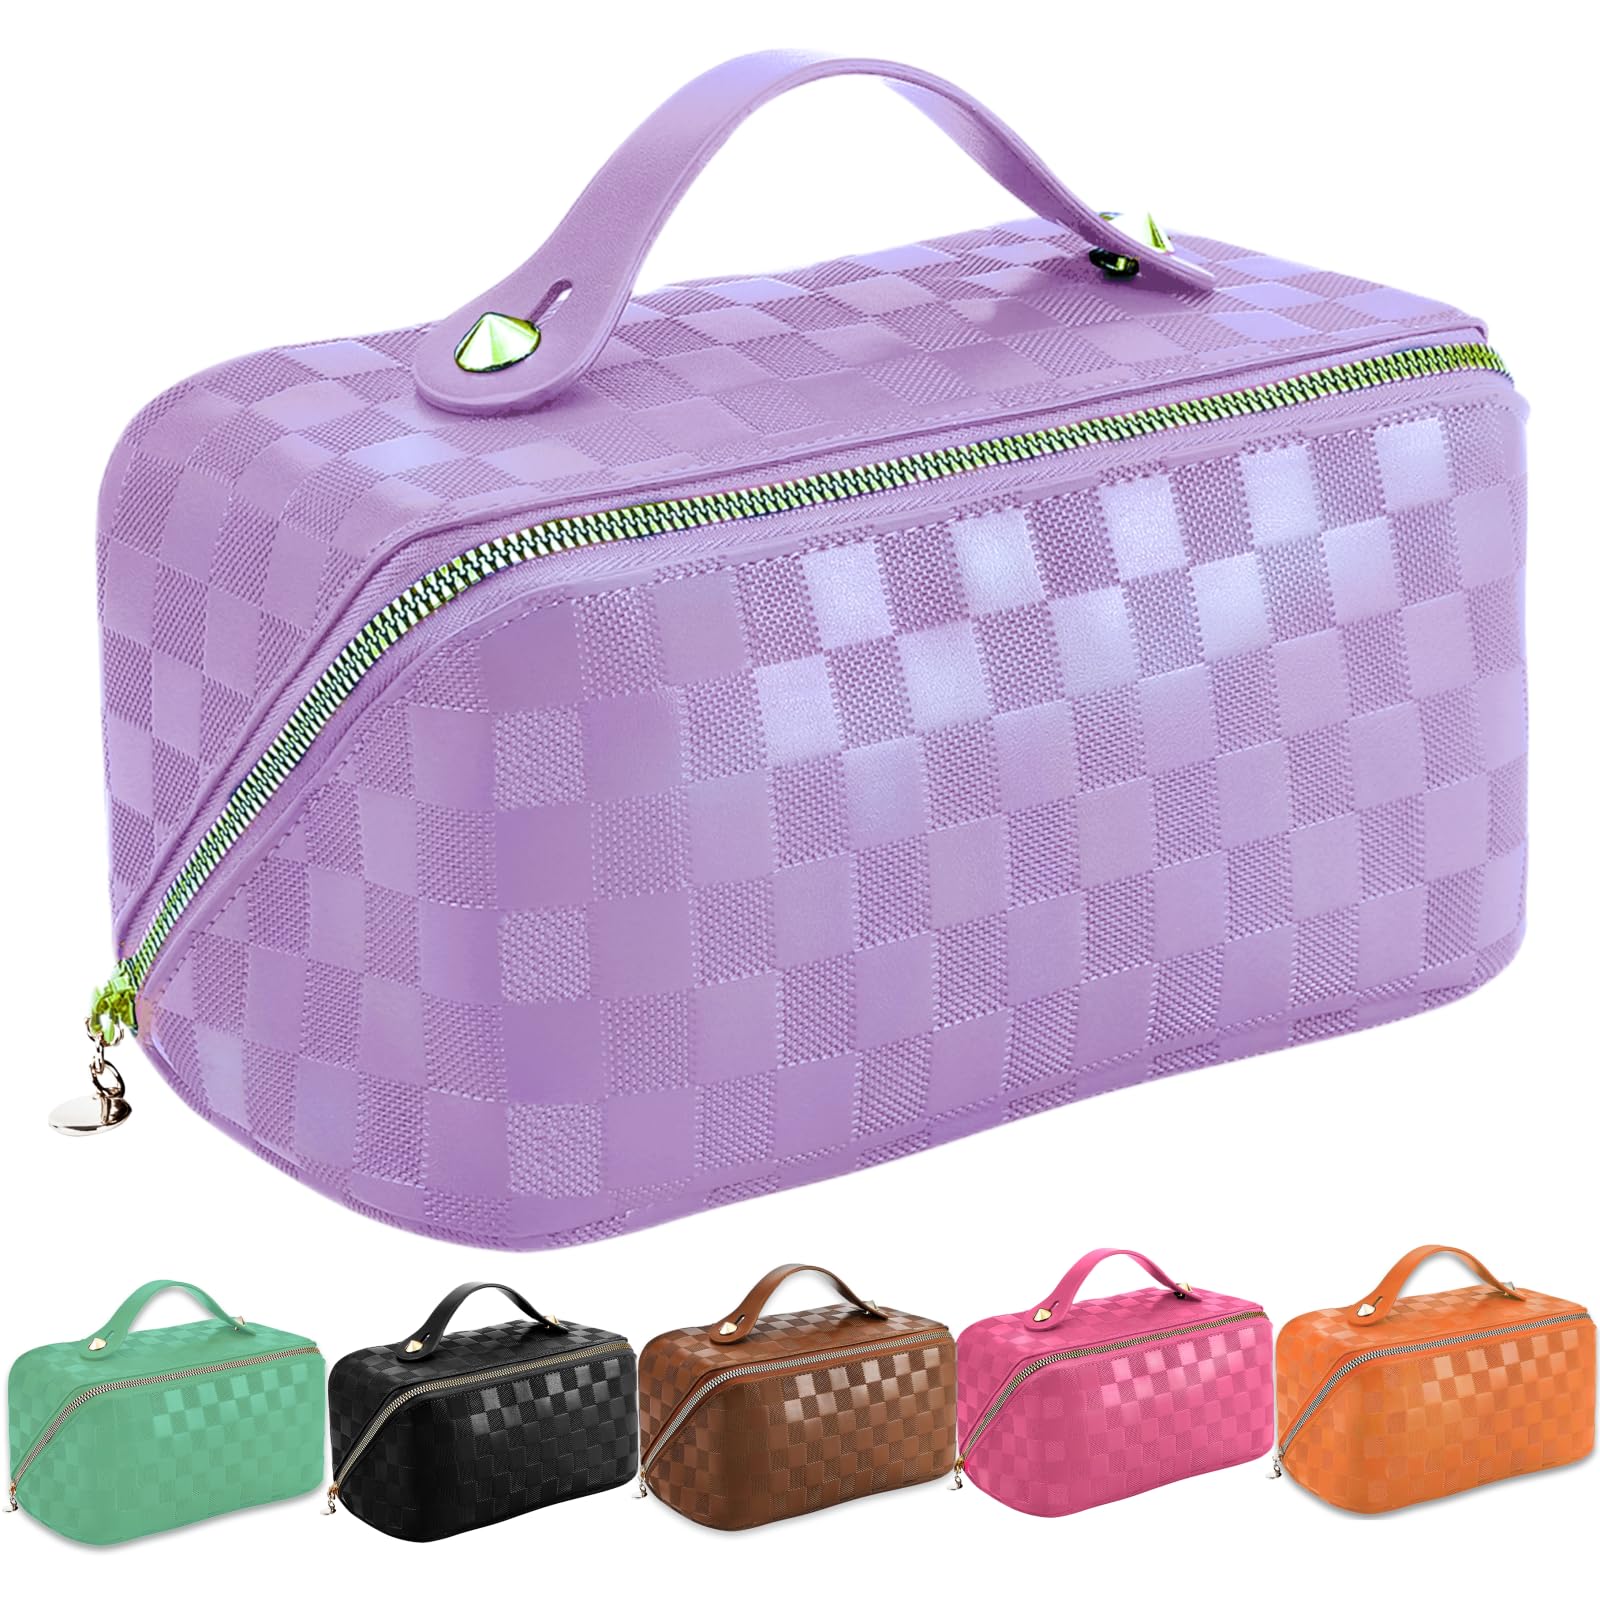 GUZINC Travel Makeup Bag for Women, Portable Checkered Cosmetic Bag organizer, Water-resistant PU Leather Travel toiletry bag for Travel, Gifts, and Daily Use (Purple)